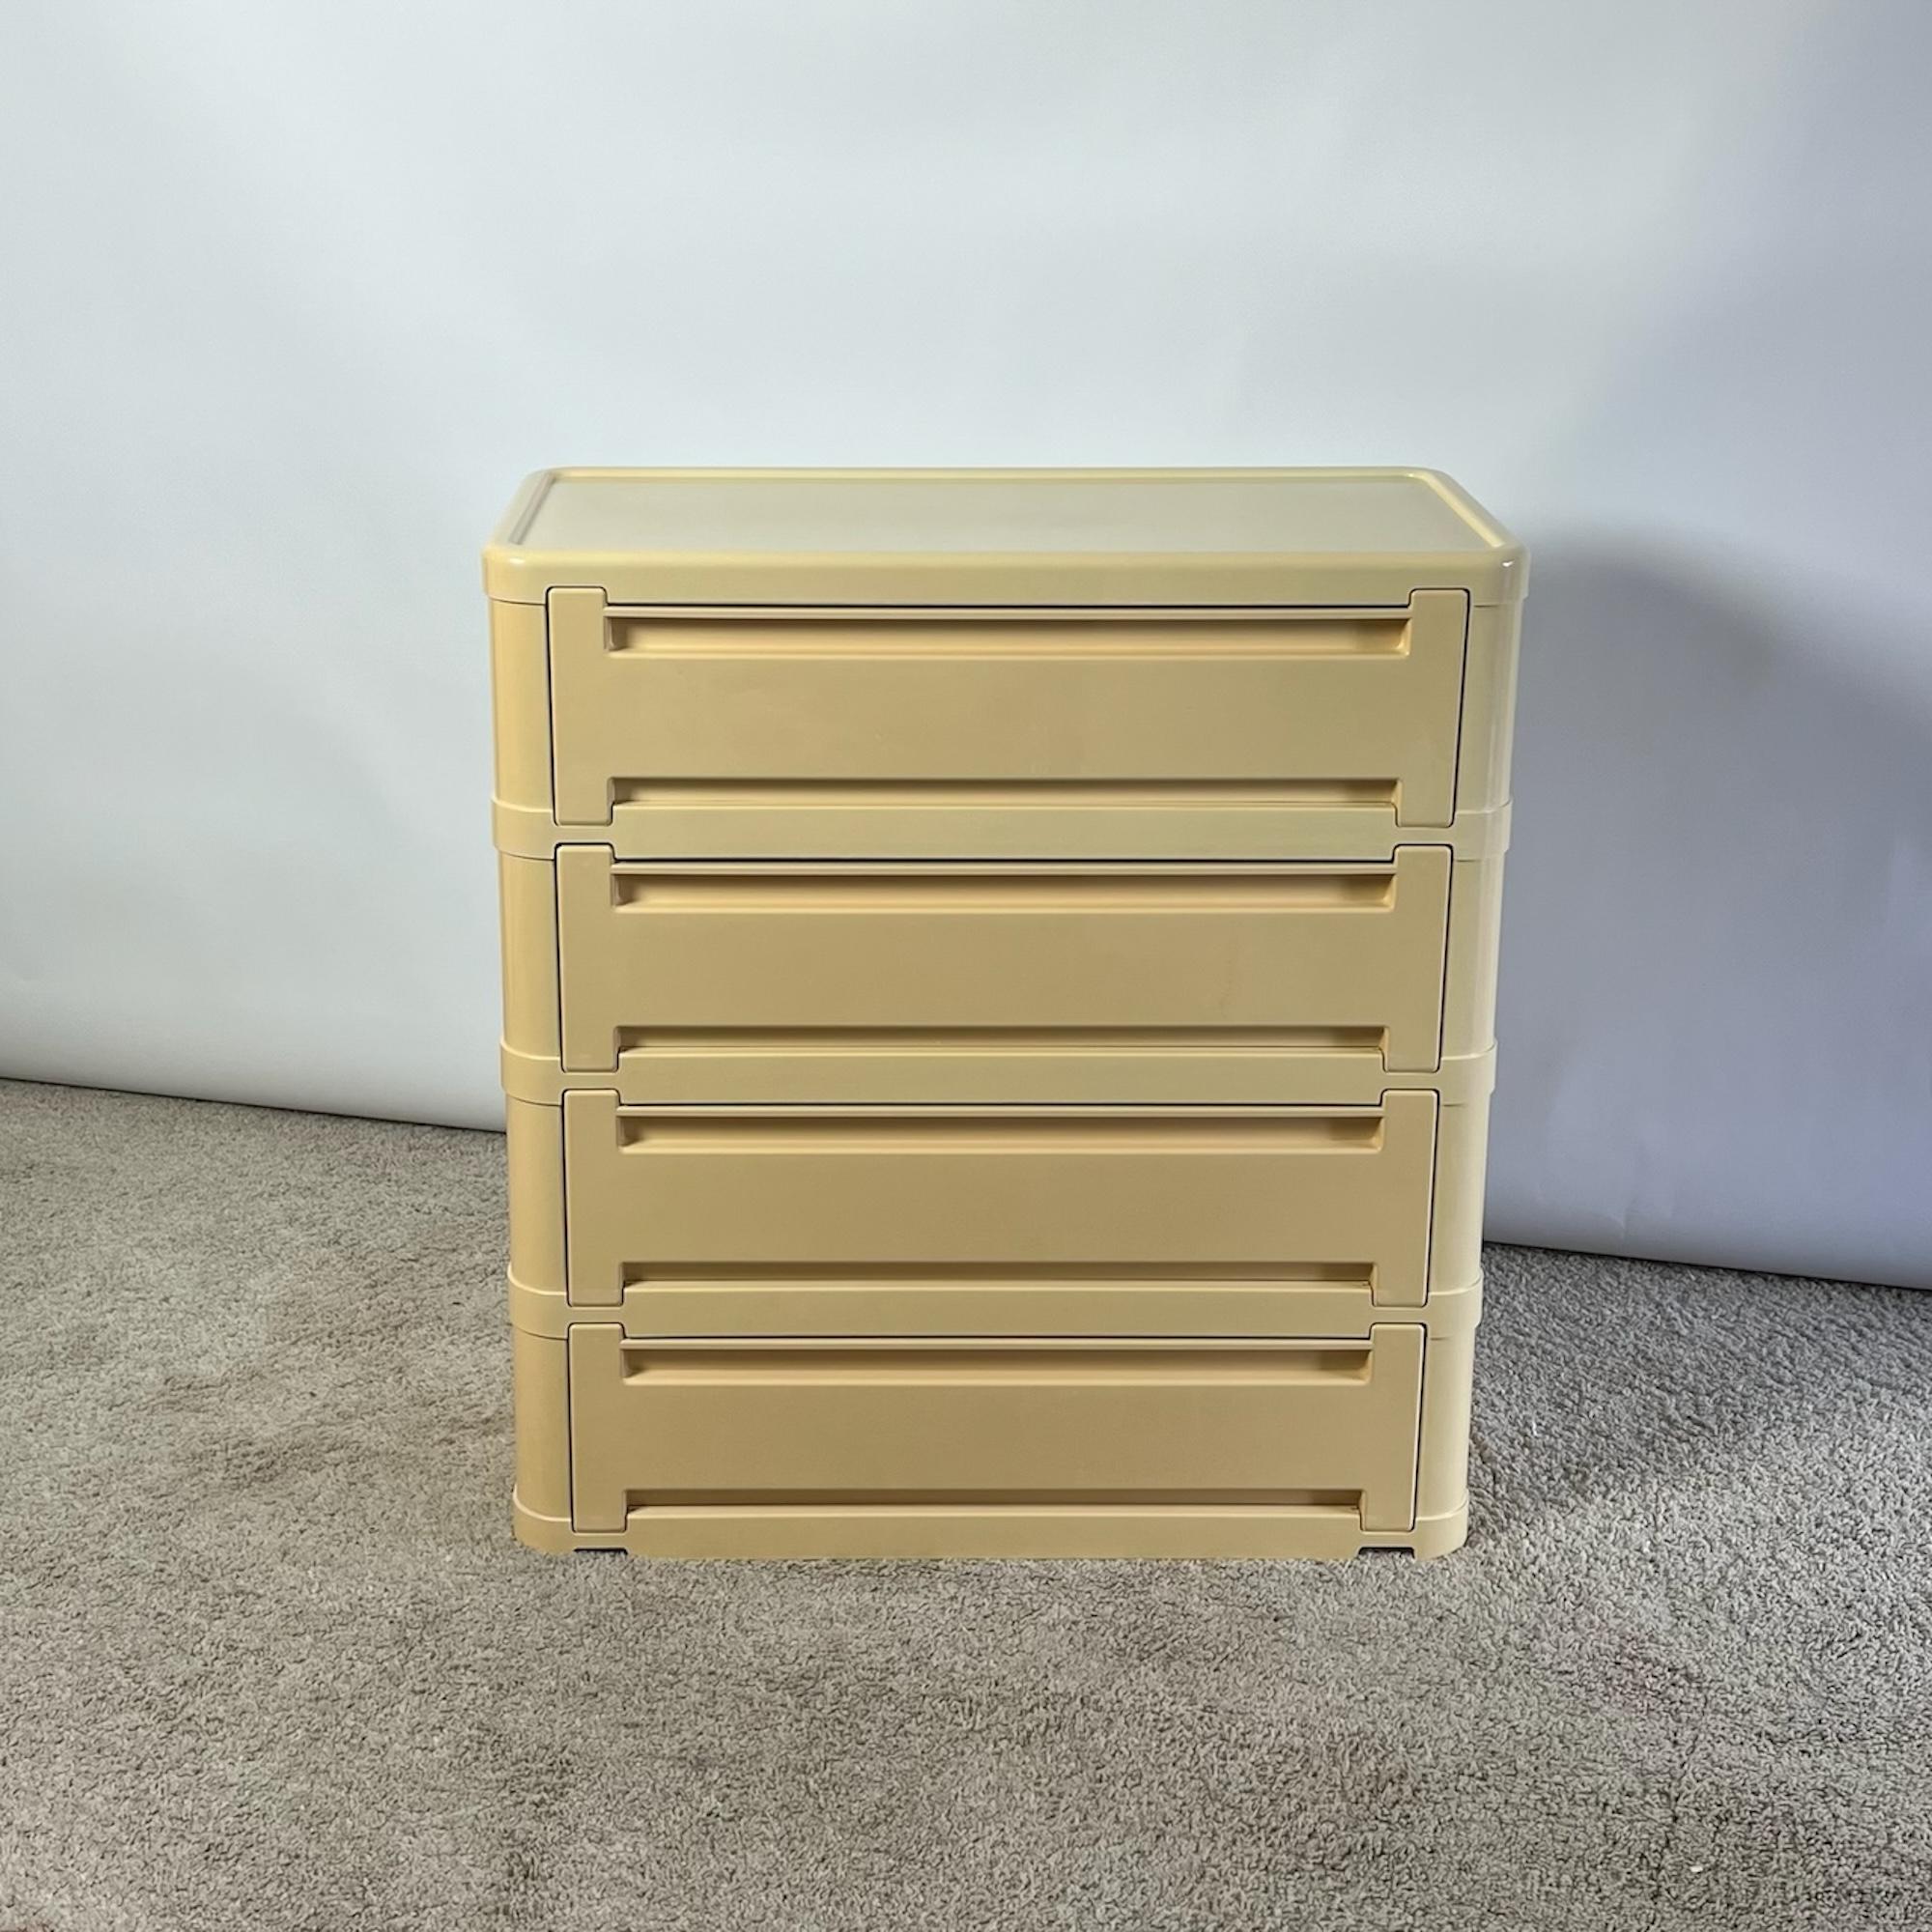 Embark on a journey through the cosmos of design with this rare plastic chest of drawers, a testament to Space Age Furniture Design. Designed by Olaf Von Bohr and meticulously produced by Kartell, this versatile sideboard or shoe rack, model 4964,